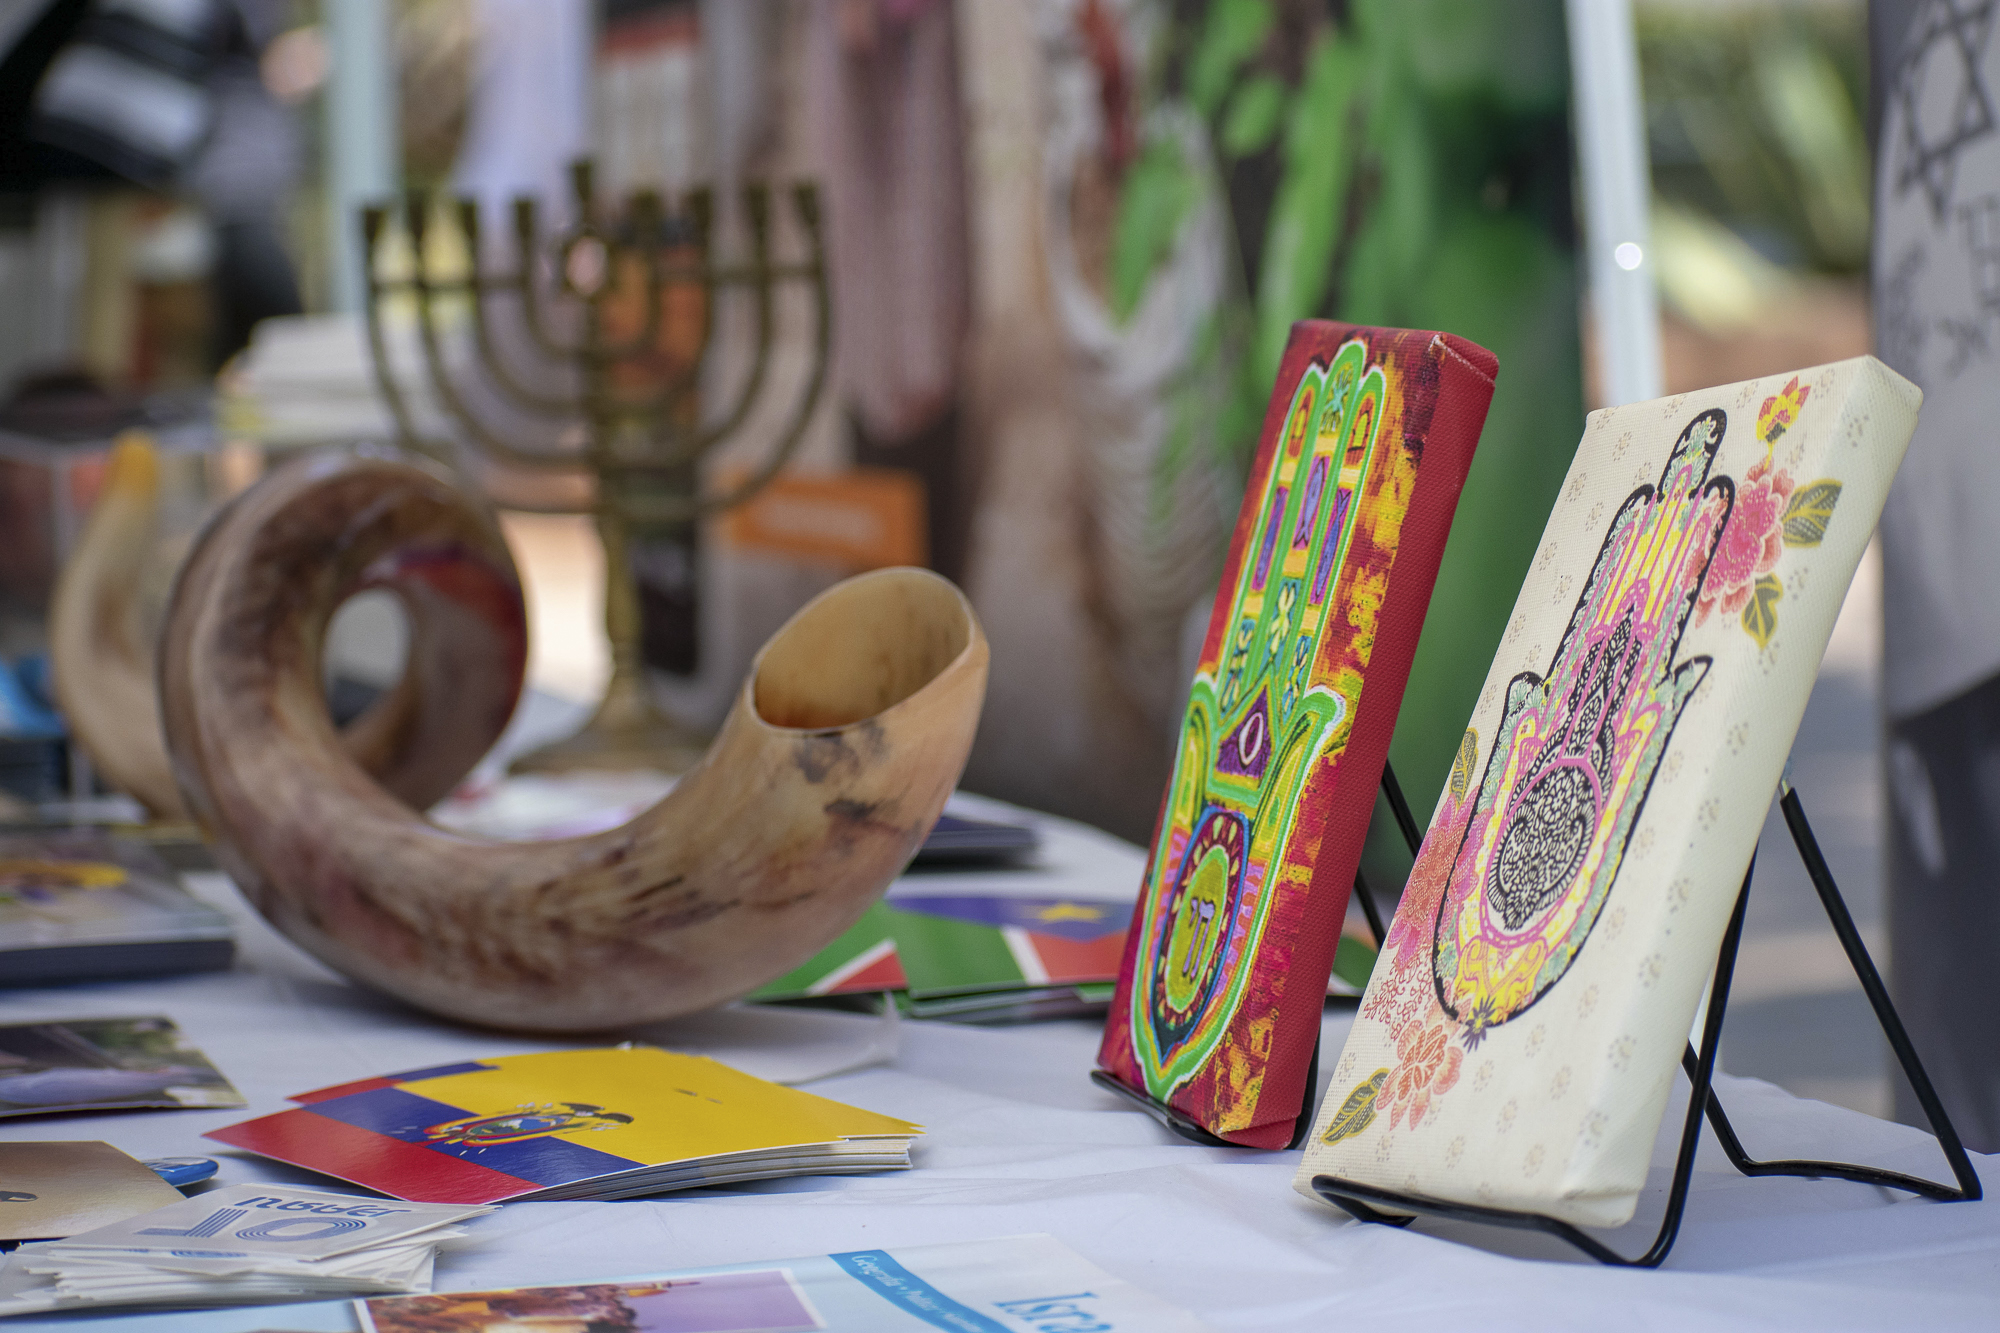  Traditional objects from Israel and other parts of the Middle East such as the shofar, menorah, and the hamsa were on display during an event put on by the Students Supporting Israel club at the college on Thursday, May 10 in Santa Monica, Californi